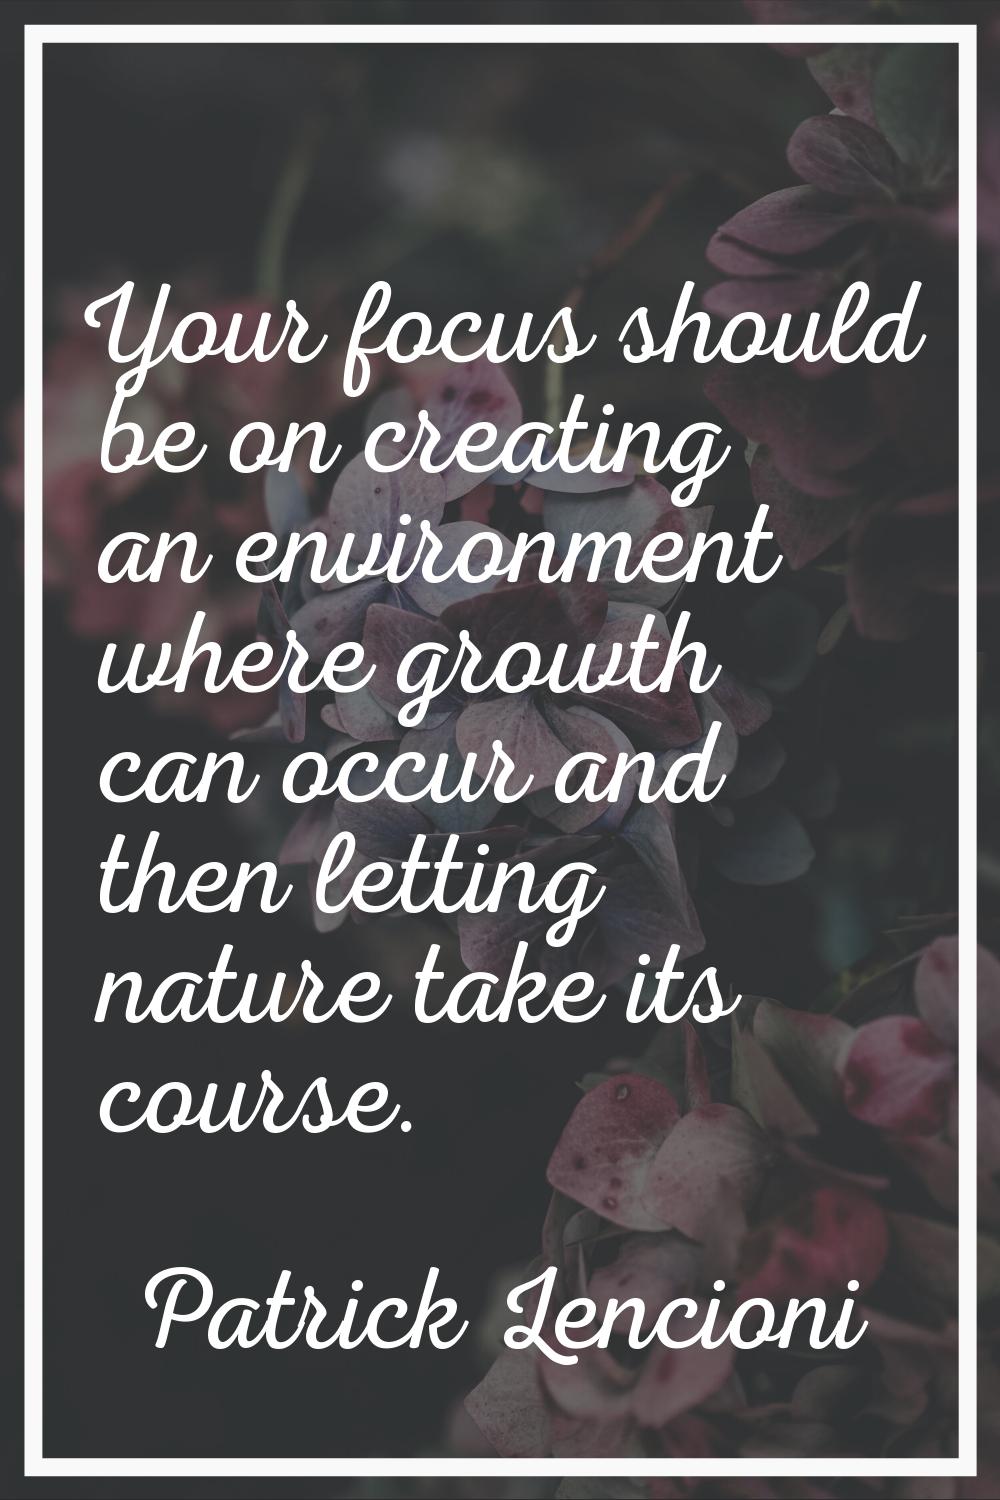 Your focus should be on creating an environment where growth can occur and then letting nature take